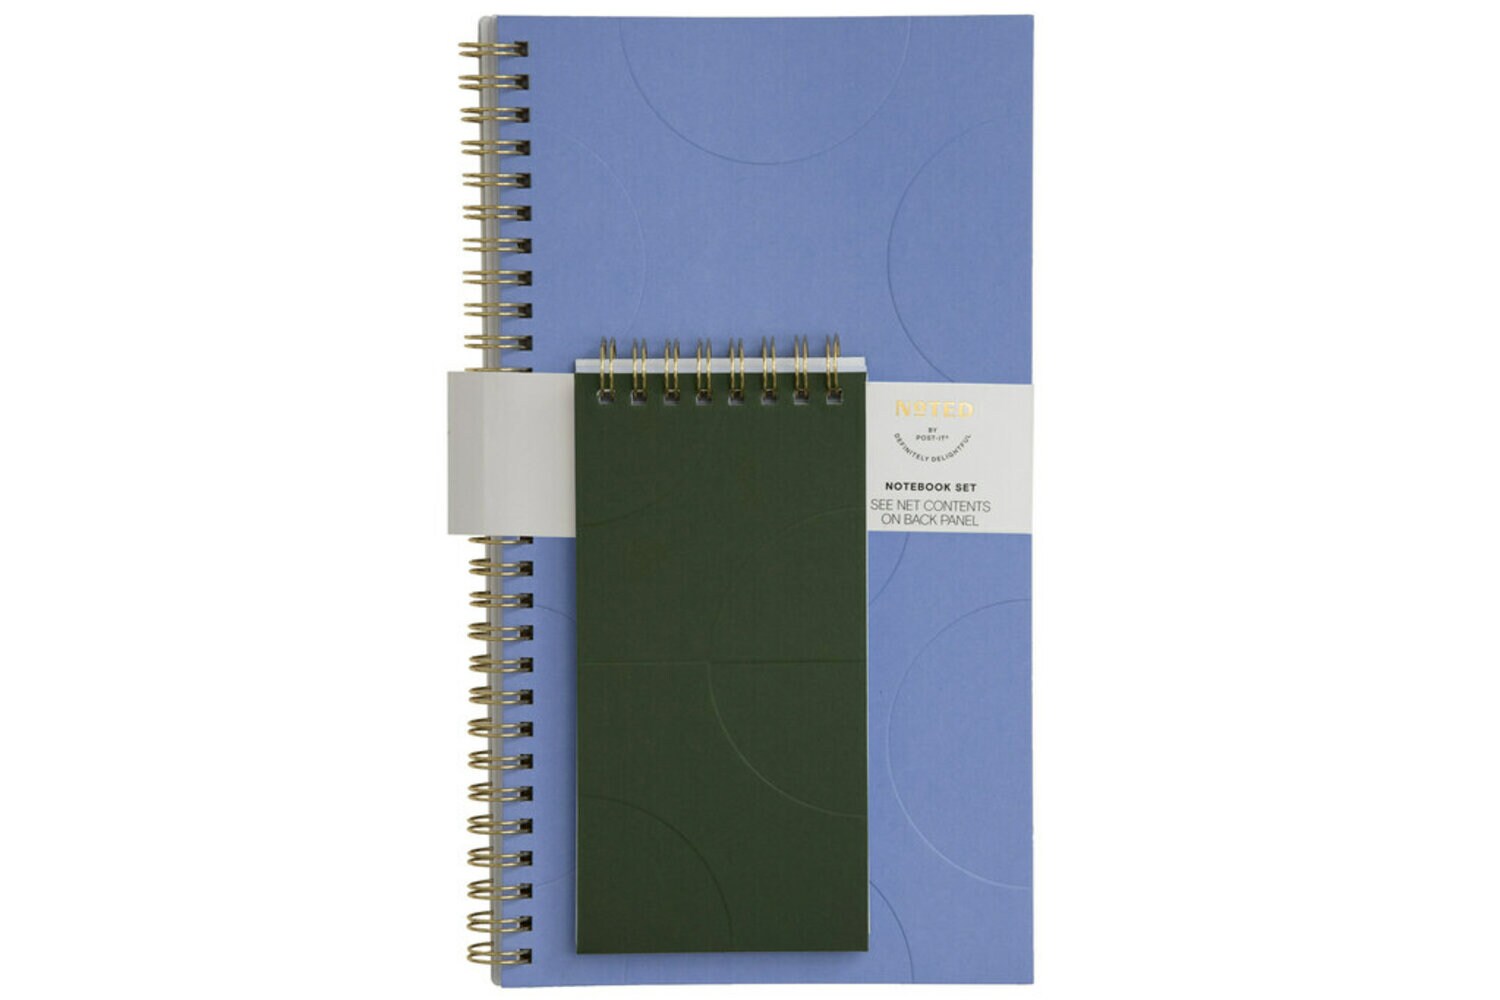 7100281849 - Post-it Notebook Set NTD6-NBSET-1, 3 in x 6 in (76 mm x 152 mm) 150 pages and 5.5 in x 10 in (139.7 mm x 254 mm) 150 pages